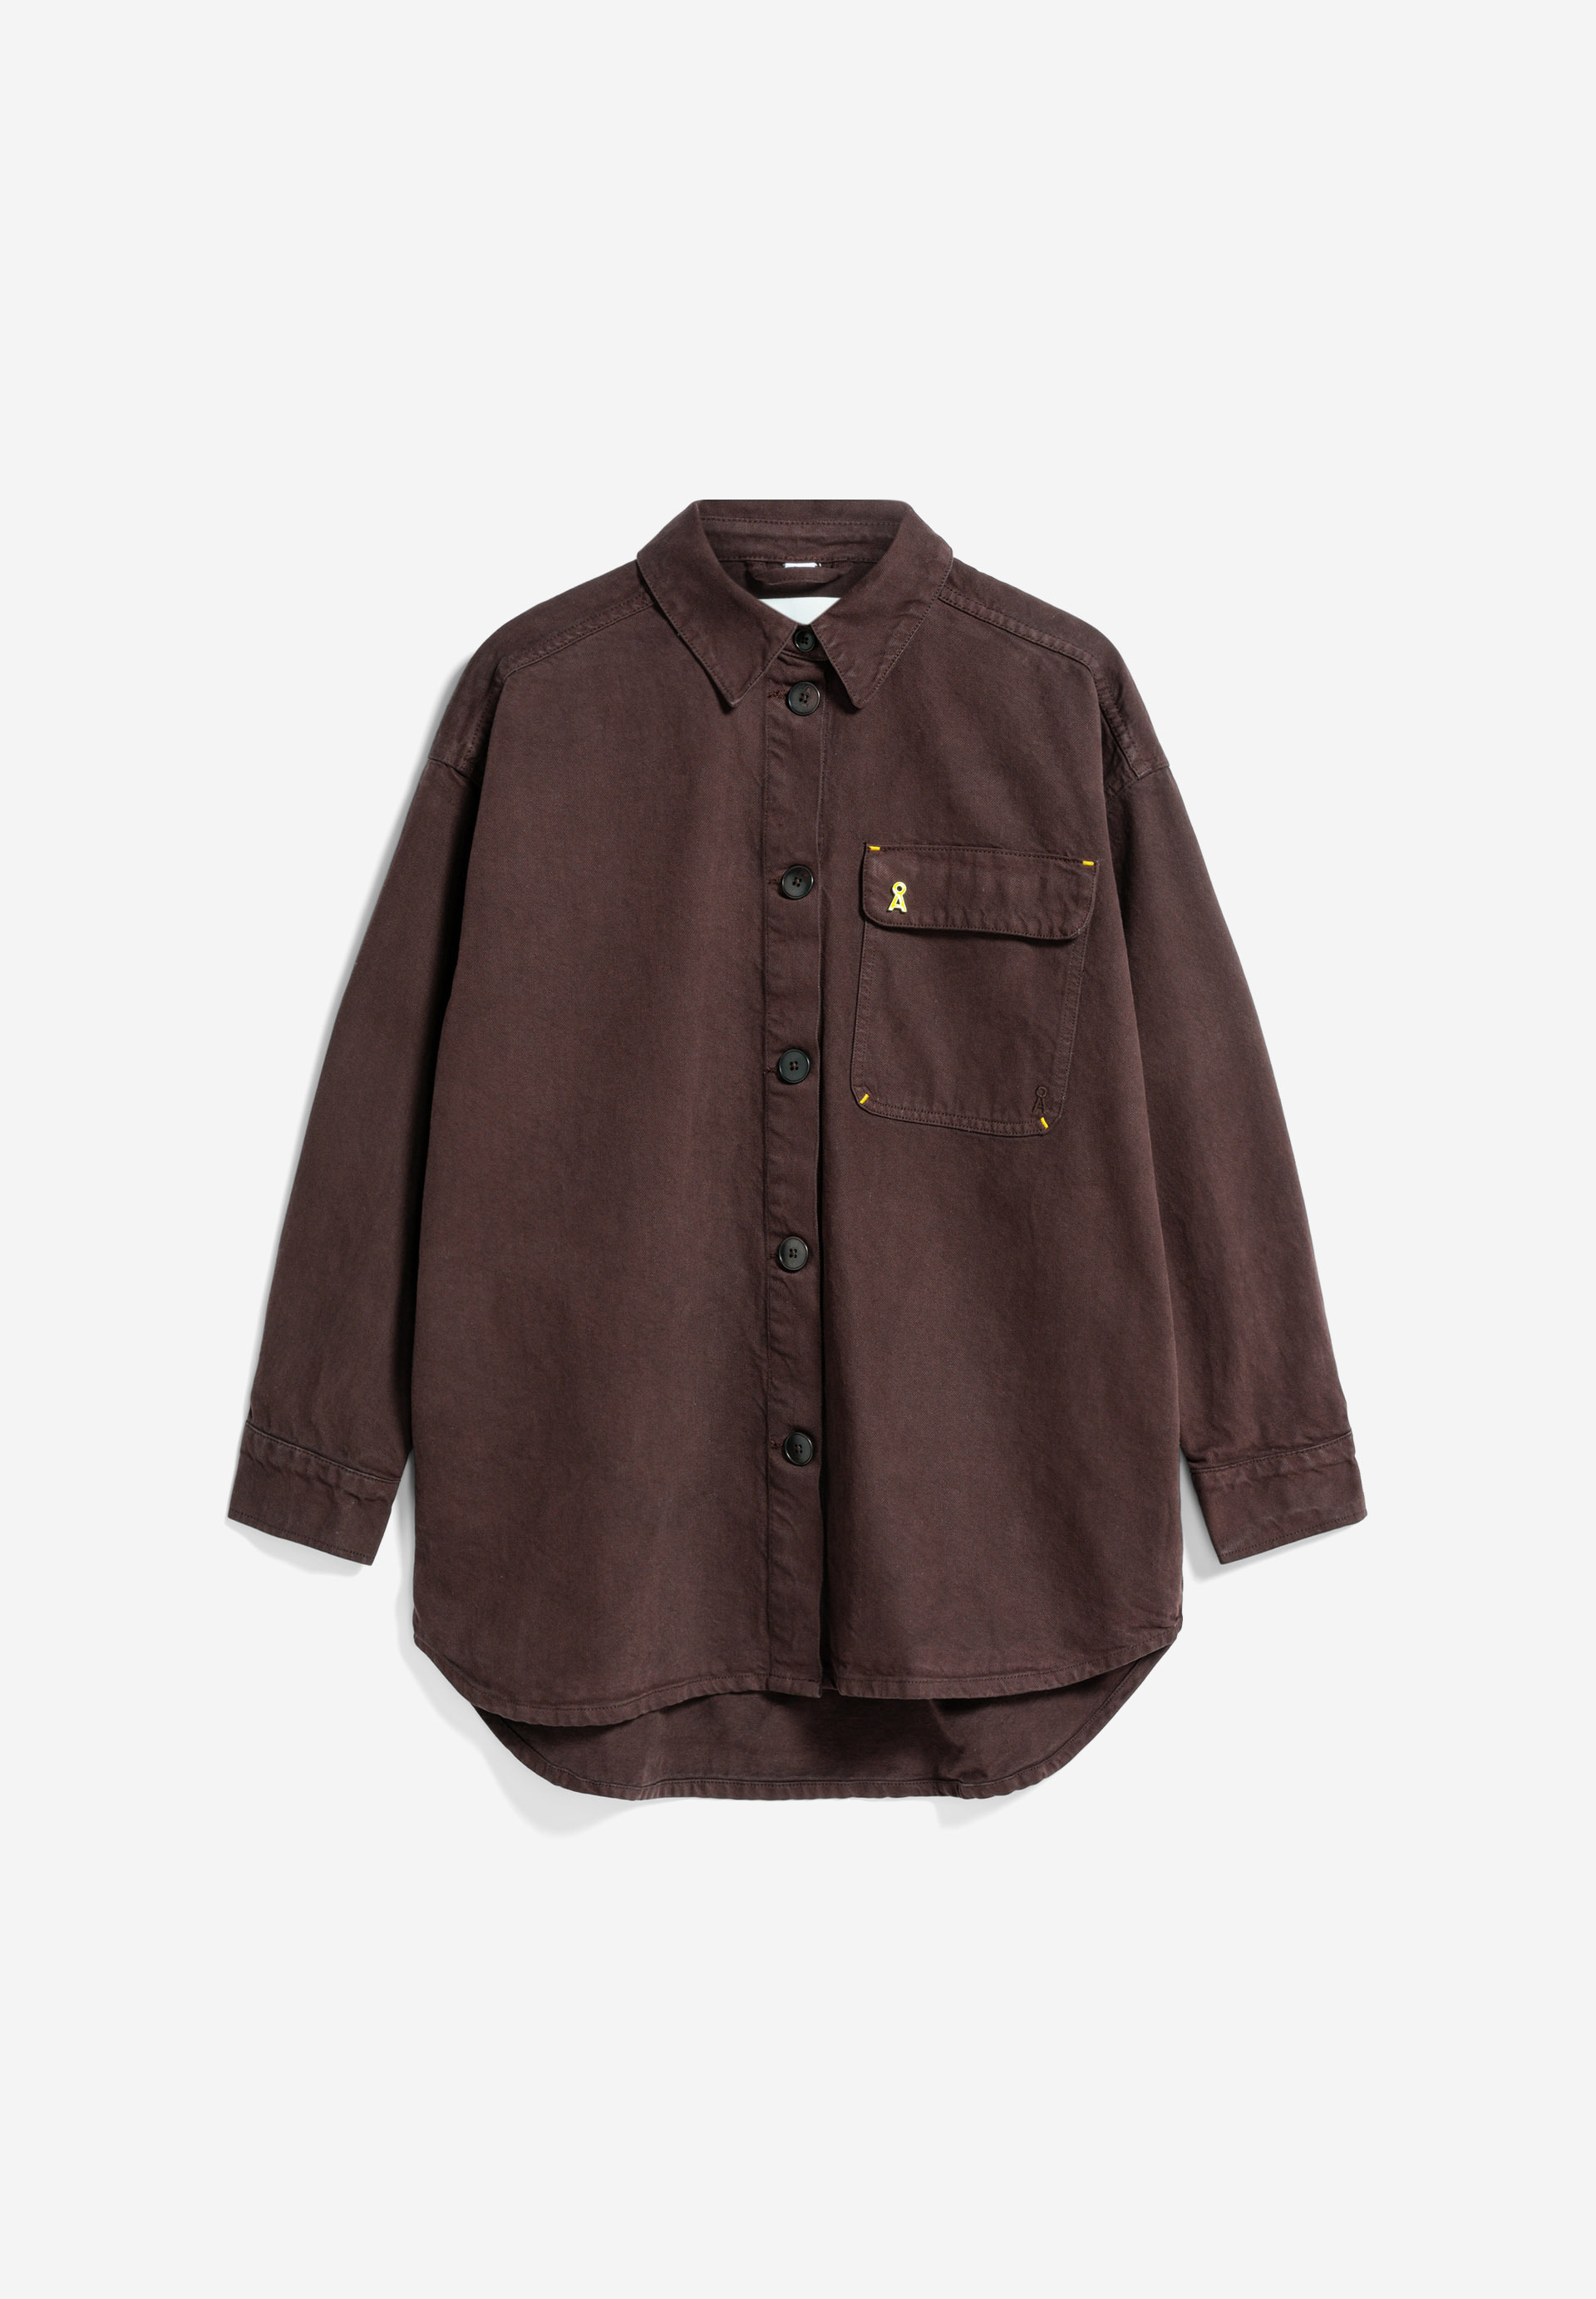 TAALE GMT DYE Overshirt Regular Fit made of recycled cotton